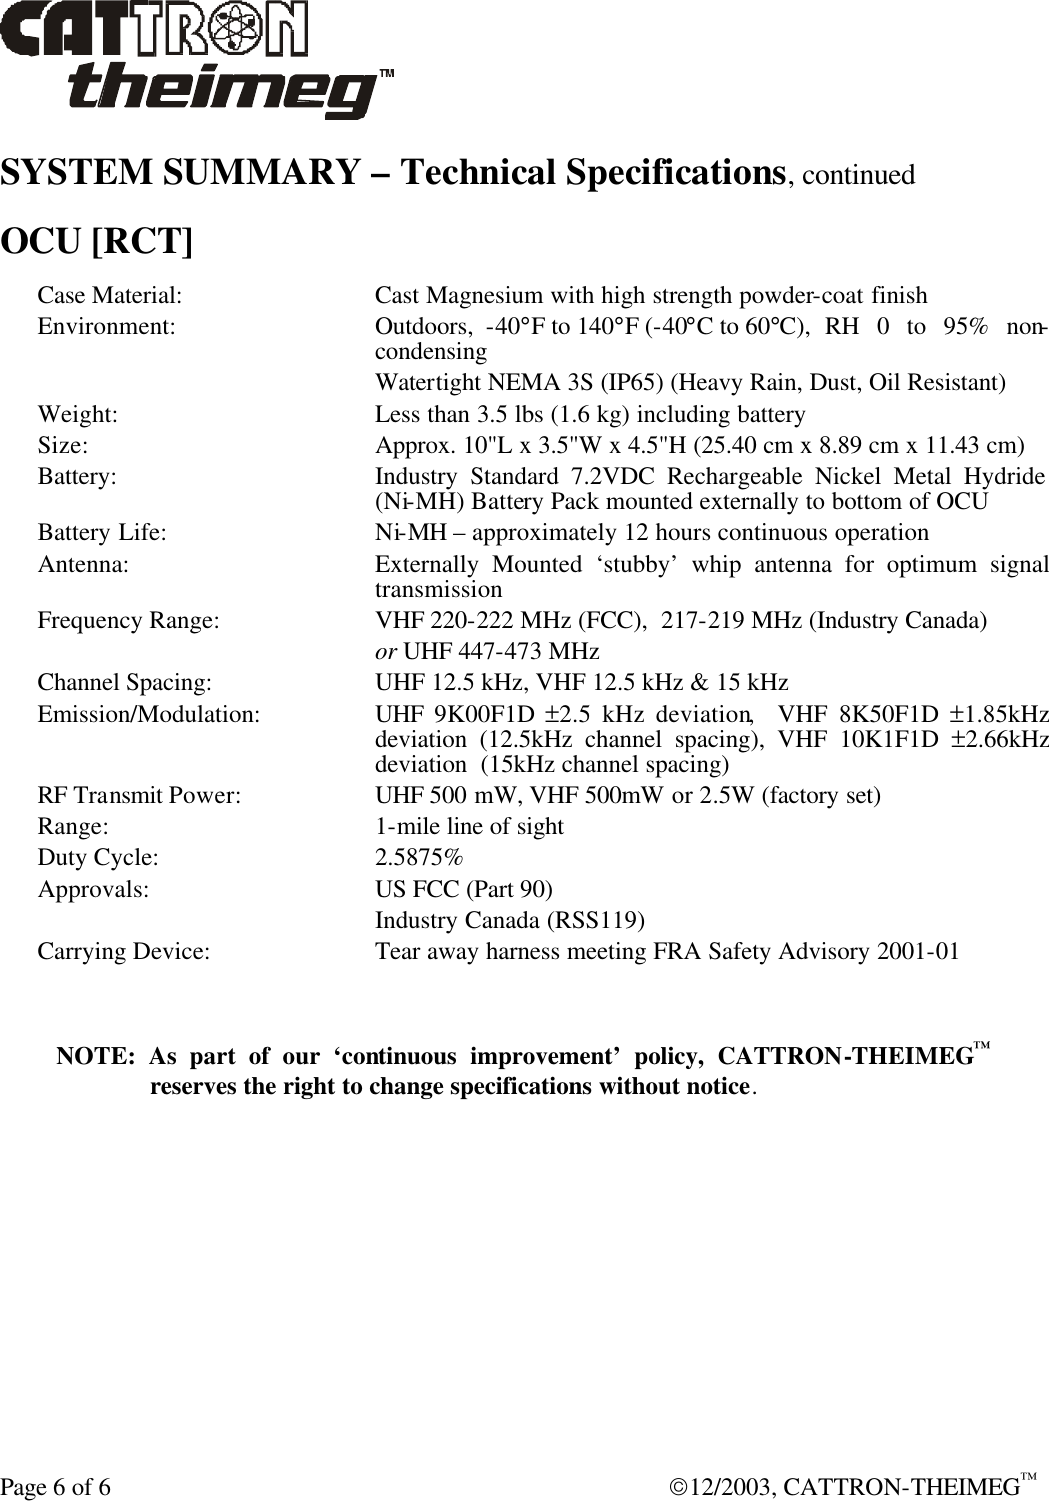  Page 6 of 6  12/2003, CATTRON-THEIMEG™ SYSTEM SUMMARY – Technical Specifications, continued  OCU [RCT] Case Material: Cast Magnesium with high strength powder-coat finish Environment: Outdoors,  -40°F to 140°F (-40°C to 60°C),  RH 0 to 95% non-condensing  Watertight NEMA 3S (IP65) (Heavy Rain, Dust, Oil Resistant) Weight: Less than 3.5 lbs (1.6 kg) including battery Size: Approx. 10&quot;L x 3.5&quot;W x 4.5&quot;H (25.40 cm x 8.89 cm x 11.43 cm) Battery: Industry Standard 7.2VDC Rechargeable Nickel Metal Hydride (Ni-MH) Battery Pack mounted externally to bottom of OCU Battery Life: Ni-MH – approximately 12 hours continuous operation Antenna: Externally Mounted ‘stubby’ whip antenna for optimum signal transmission Frequency Range: VHF 220-222 MHz (FCC),  217-219 MHz (Industry Canada)  or UHF 447-473 MHz  Channel Spacing: UHF 12.5 kHz, VHF 12.5 kHz &amp; 15 kHz Emission/Modulation: UHF  9K00F1D  ±2.5 kHz deviation,  VHF 8K50F1D ±1.85kHz  deviation (12.5kHz channel spacing), VHF 10K1F1D ±2.66kHz deviation  (15kHz channel spacing) RF Transmit Power: UHF 500 mW, VHF 500mW or 2.5W (factory set) Range:  1-mile line of sight Duty Cycle: 2.5875% Approvals: US FCC (Part 90)  Industry Canada (RSS119) Carrying Device: Tear away harness meeting FRA Safety Advisory 2001-01  NOTE: As part of our ‘continuous improvement’ policy, CATTRON-THEIMEG™ reserves the right to change specifications without notice. 